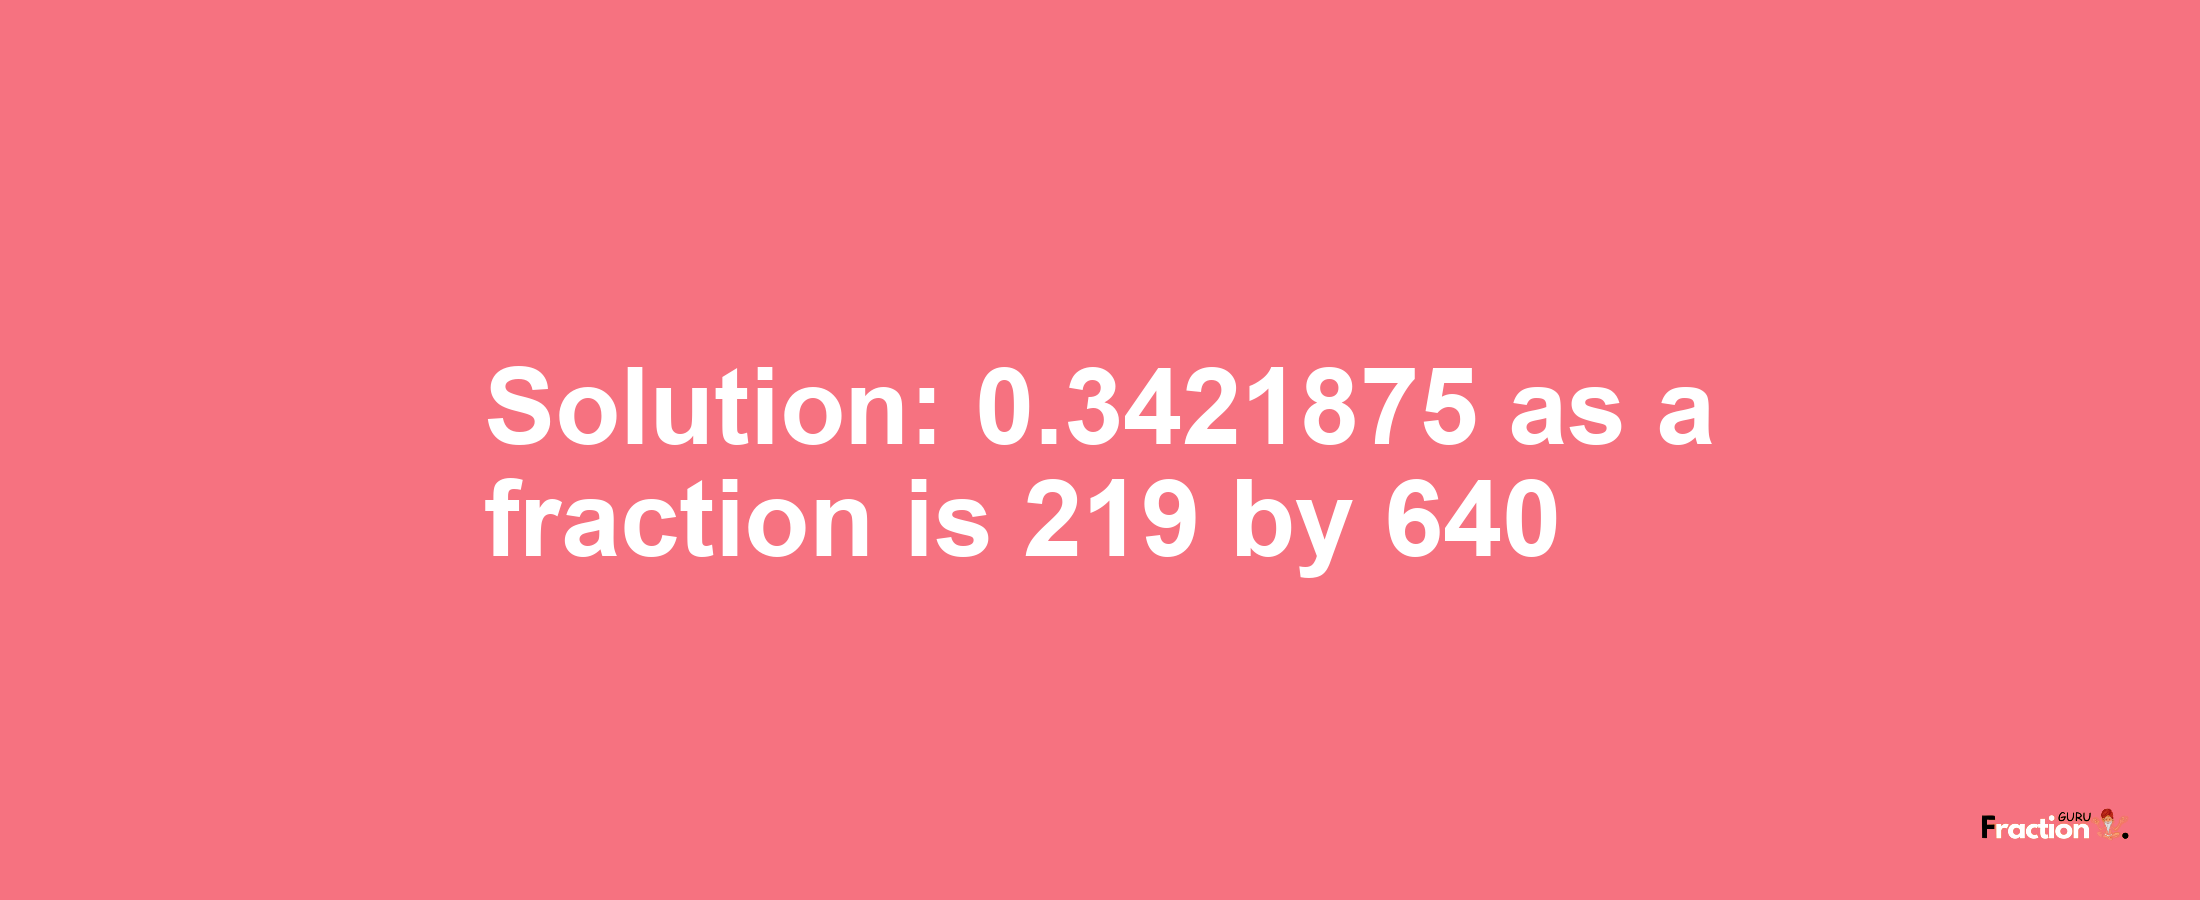 Solution:0.3421875 as a fraction is 219/640